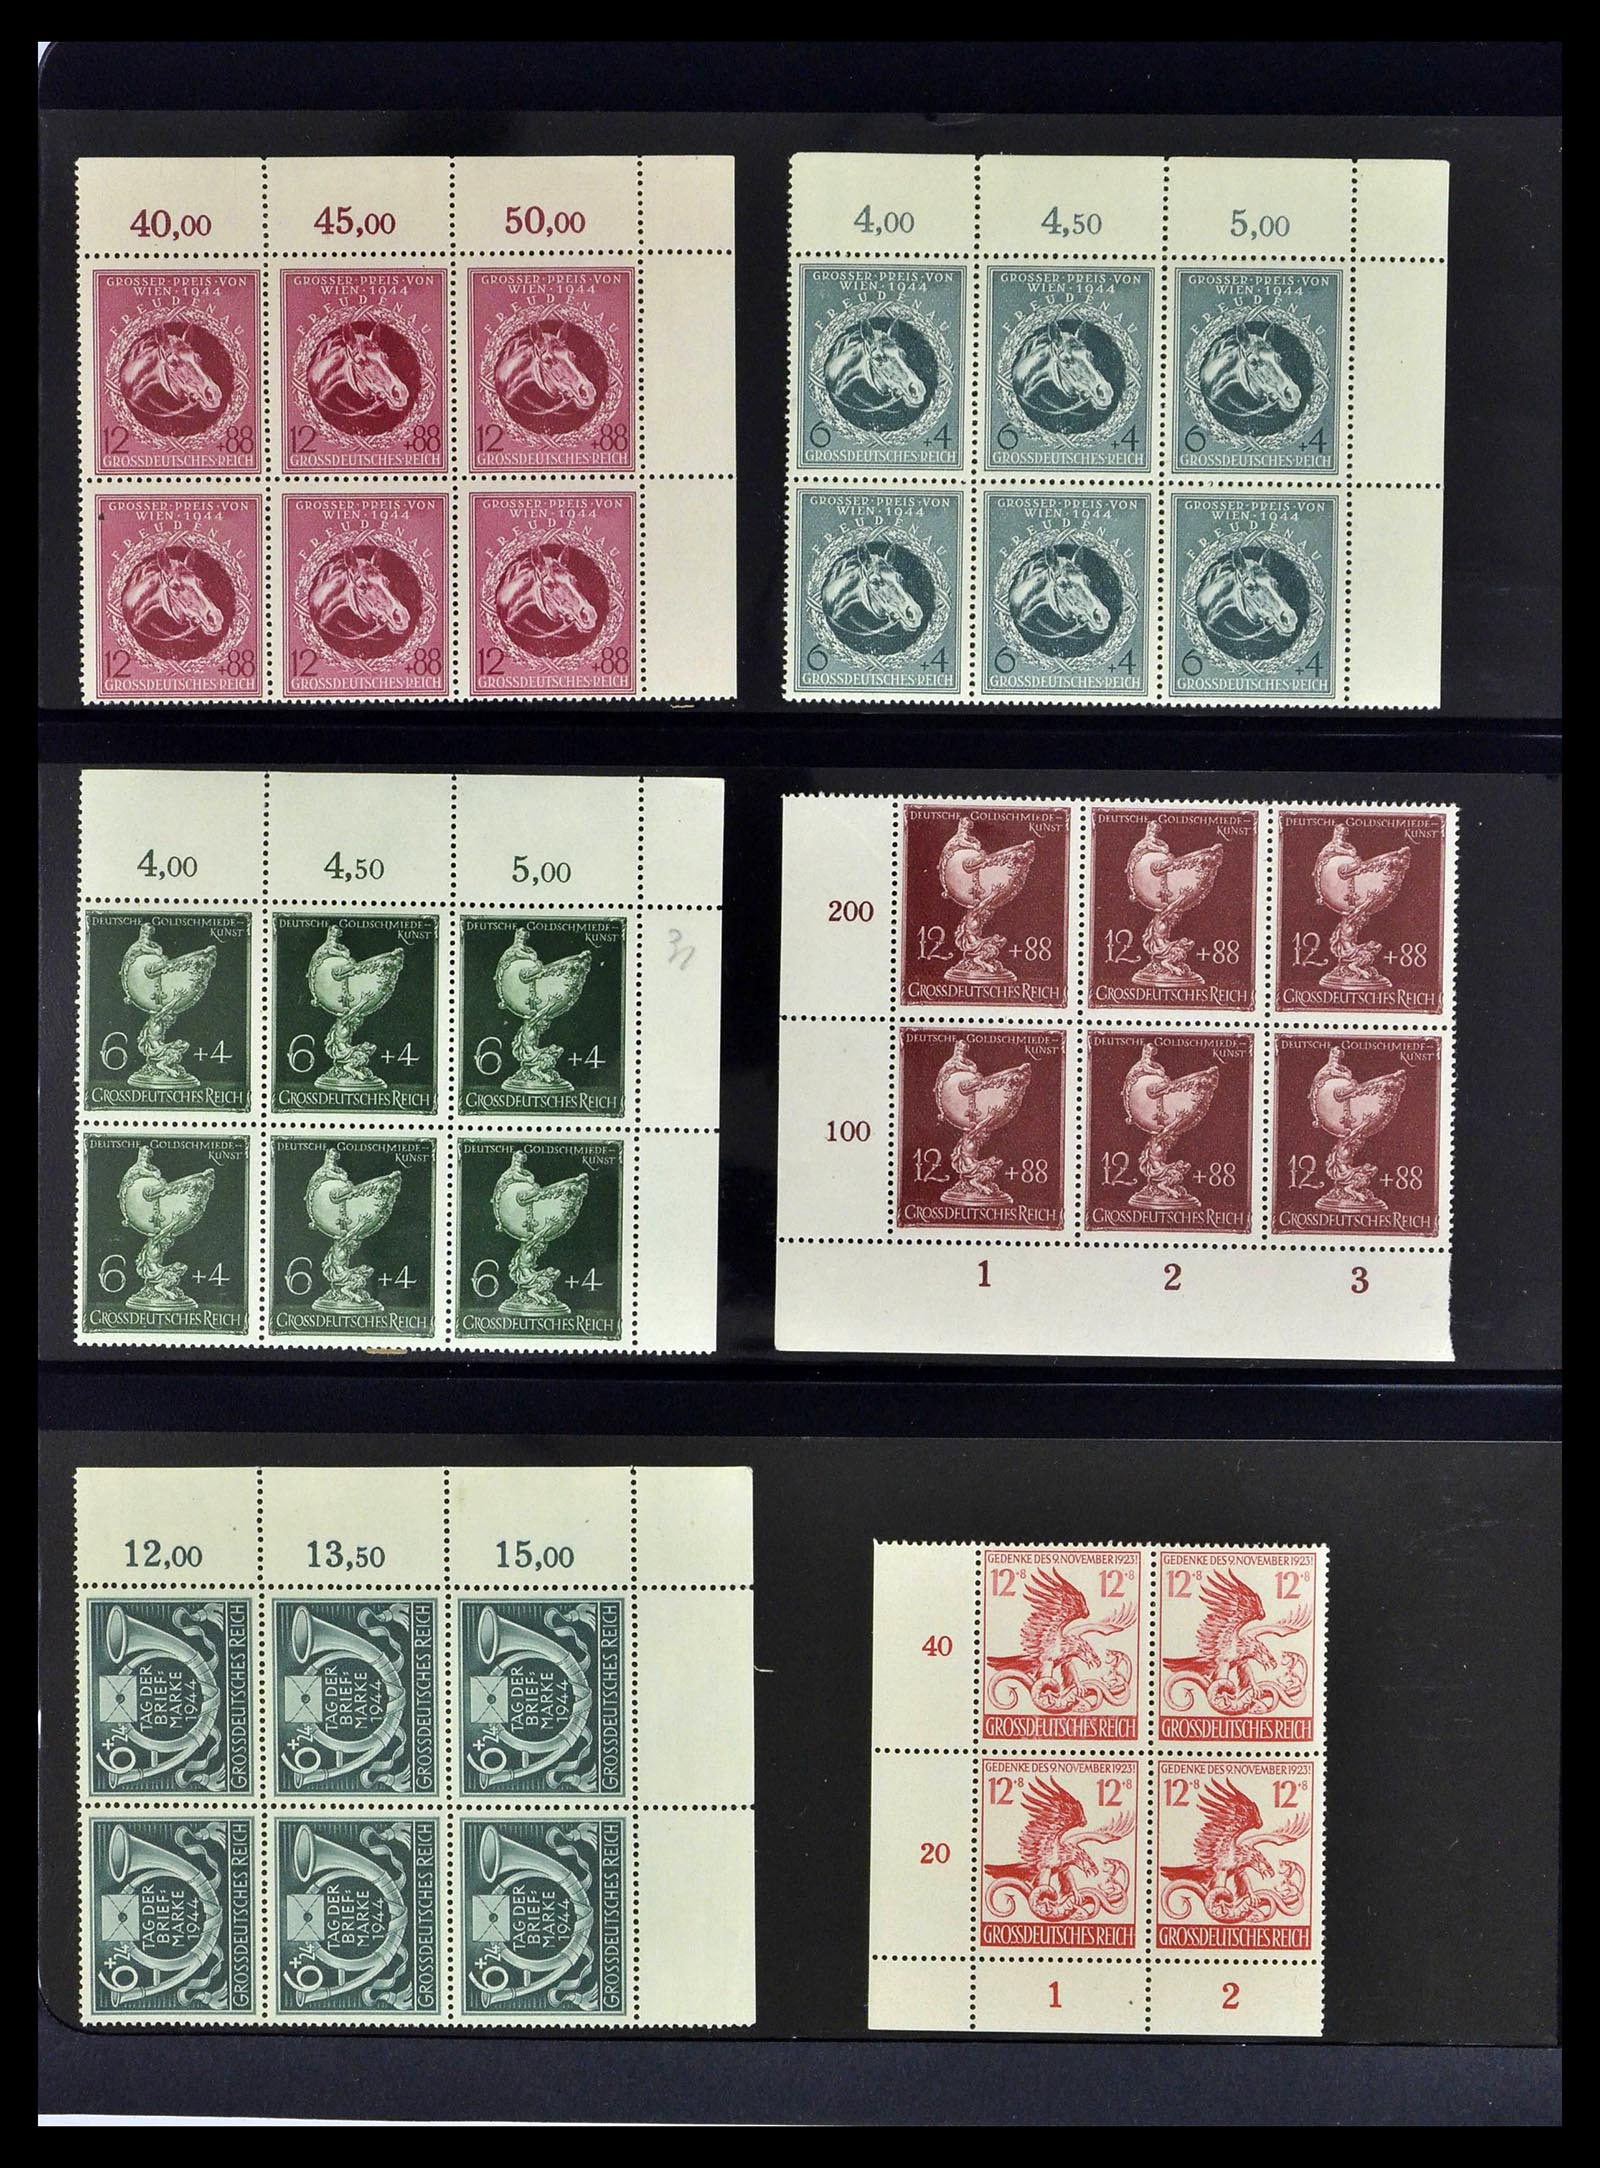 39255 0030 - Stamp collection 39255 German Reich MNH blocks of 4.